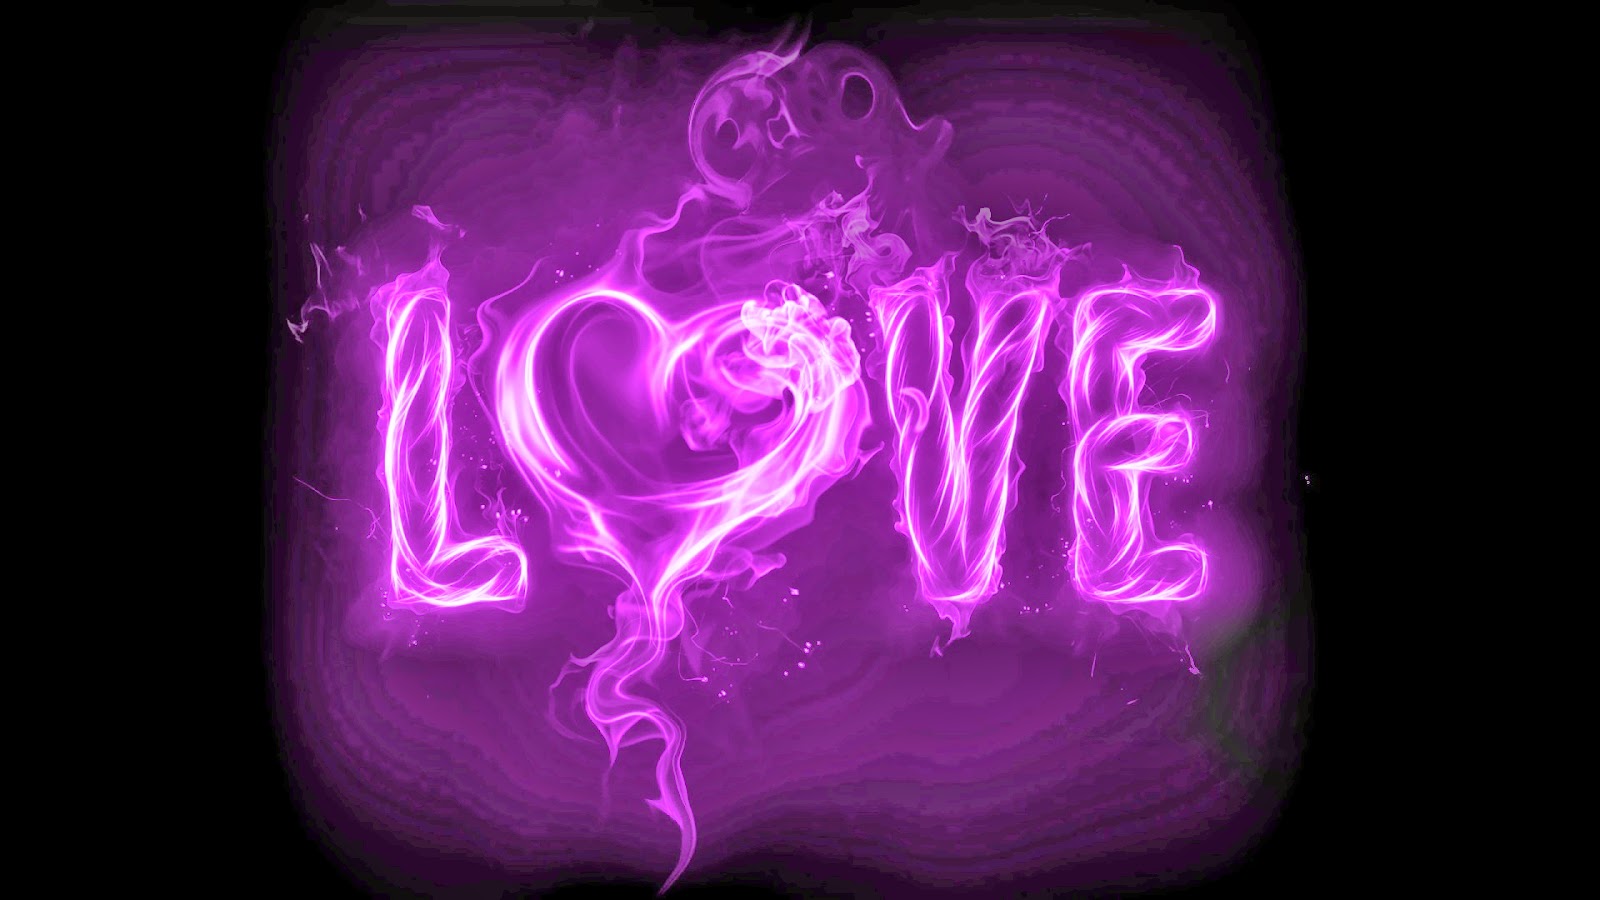  Purple Love  Backgrounds Love  Wallpaper Picture Gallery